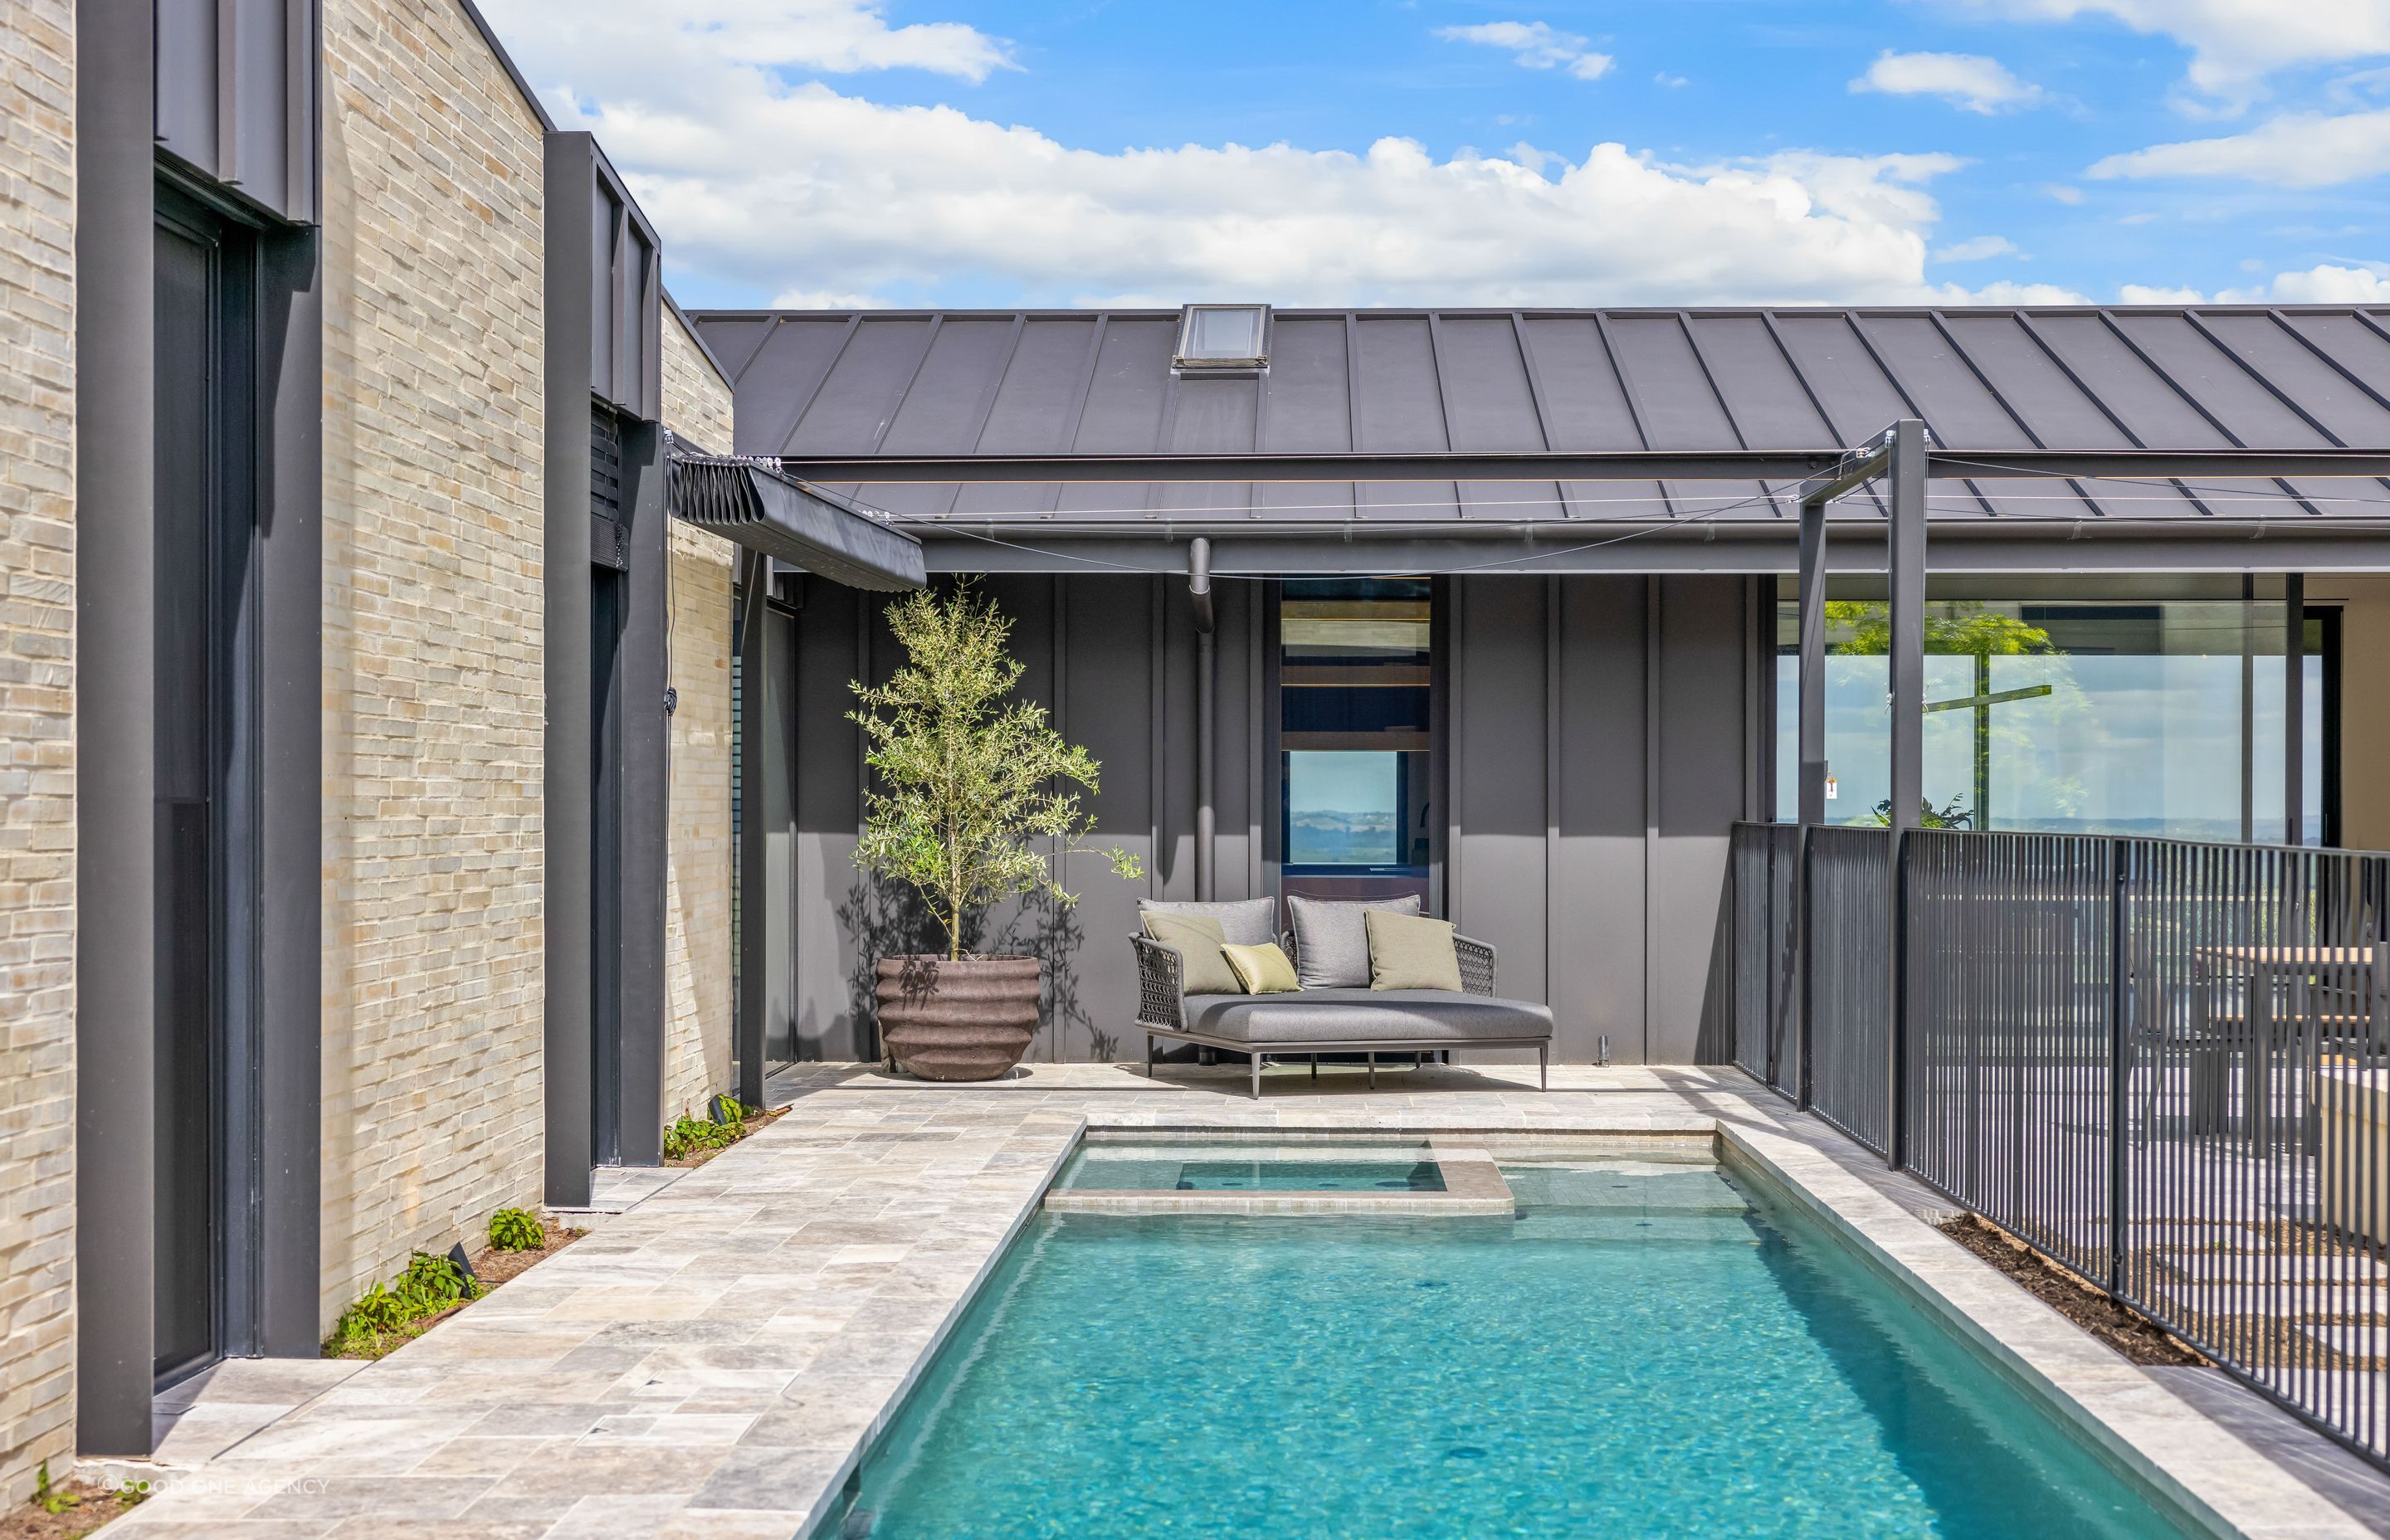 An enticing pool sits to side of the central courtyard